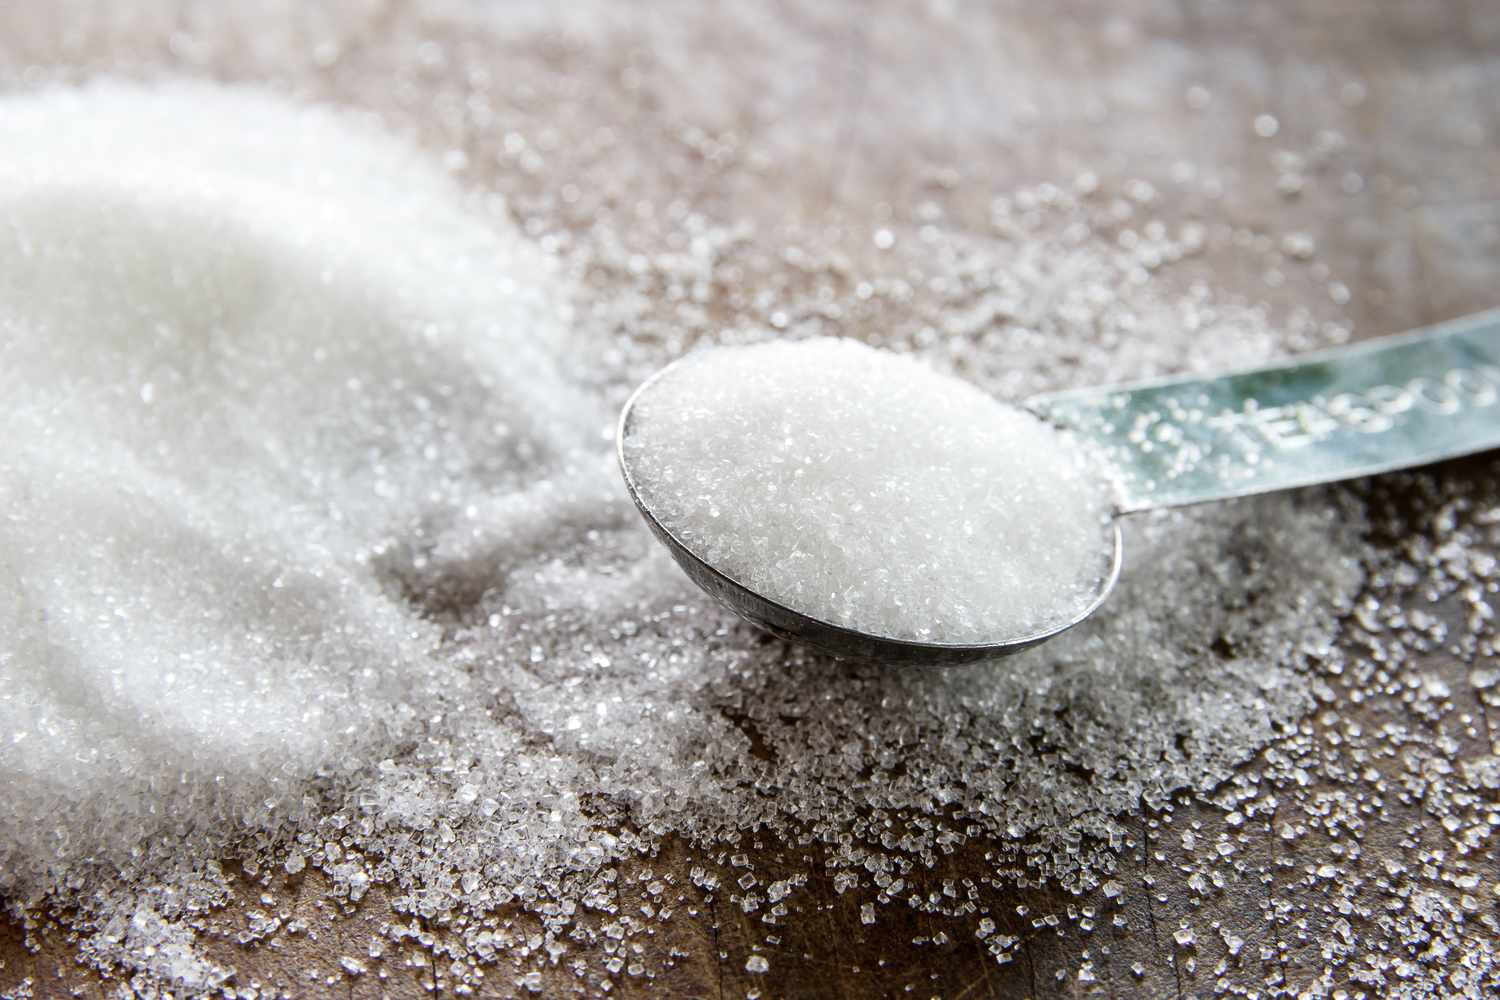 Parliament Committee directs Finance Ministry to facilitate in sugar import